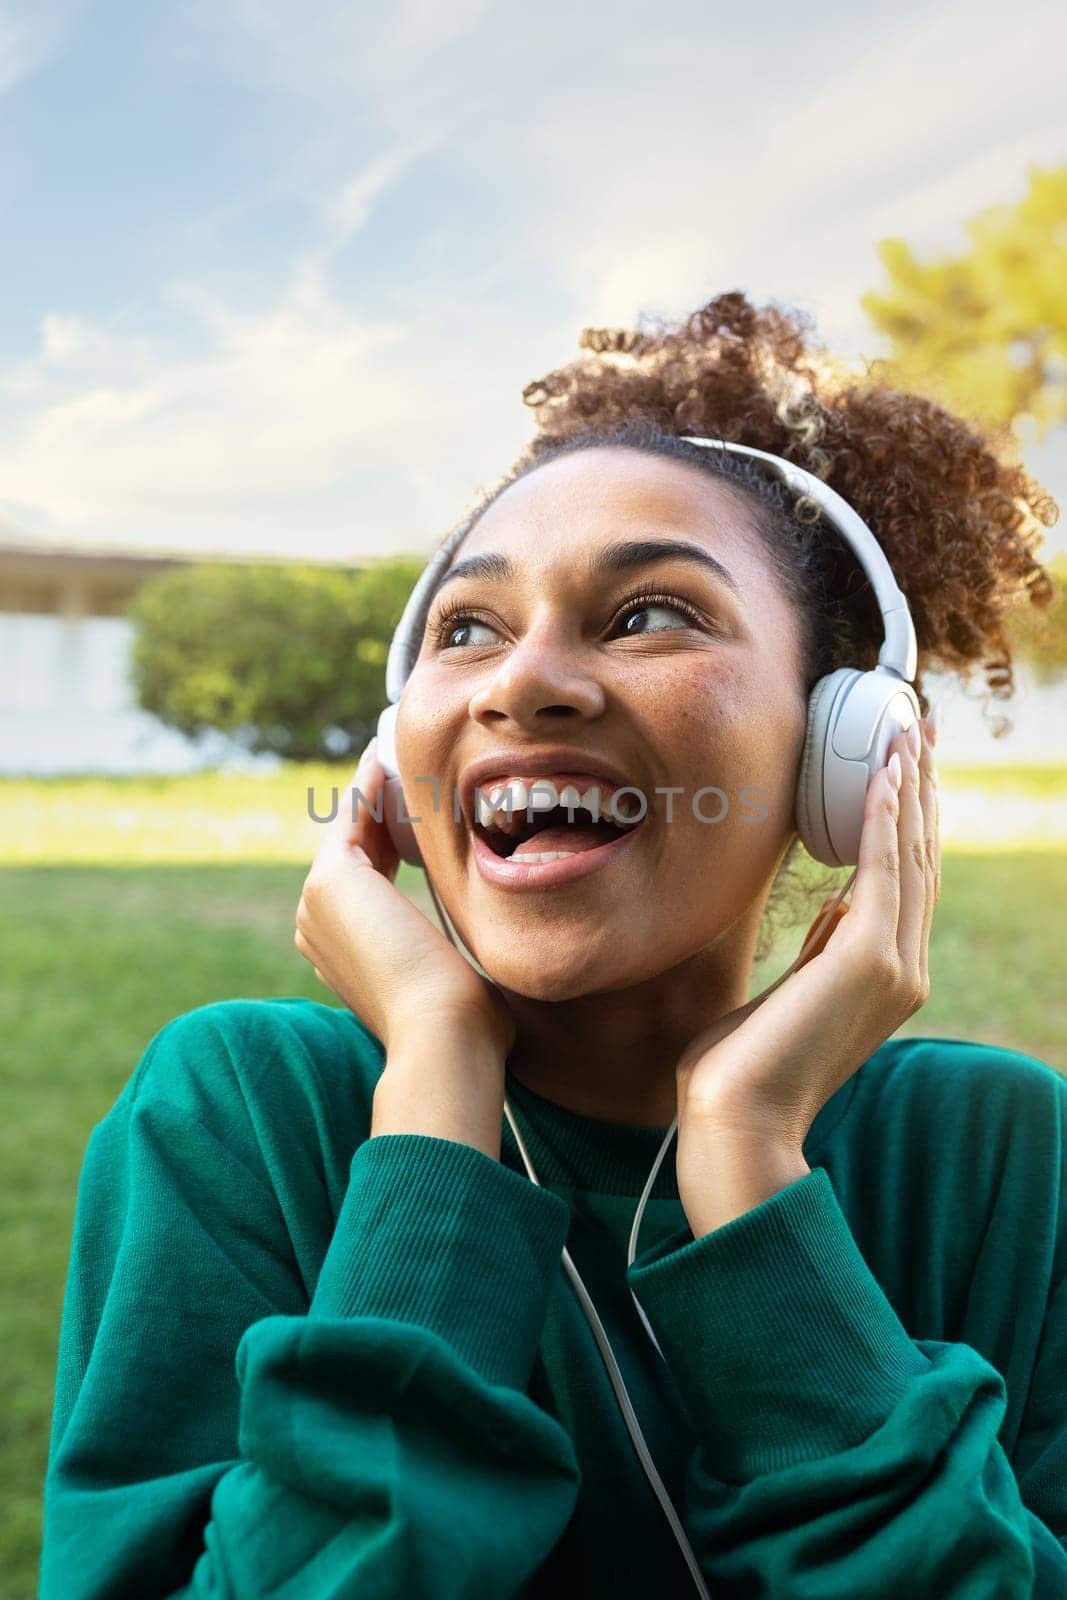 Vertical portrait of happy African American young woman listening to music using headphones. Lifestyle by Hoverstock